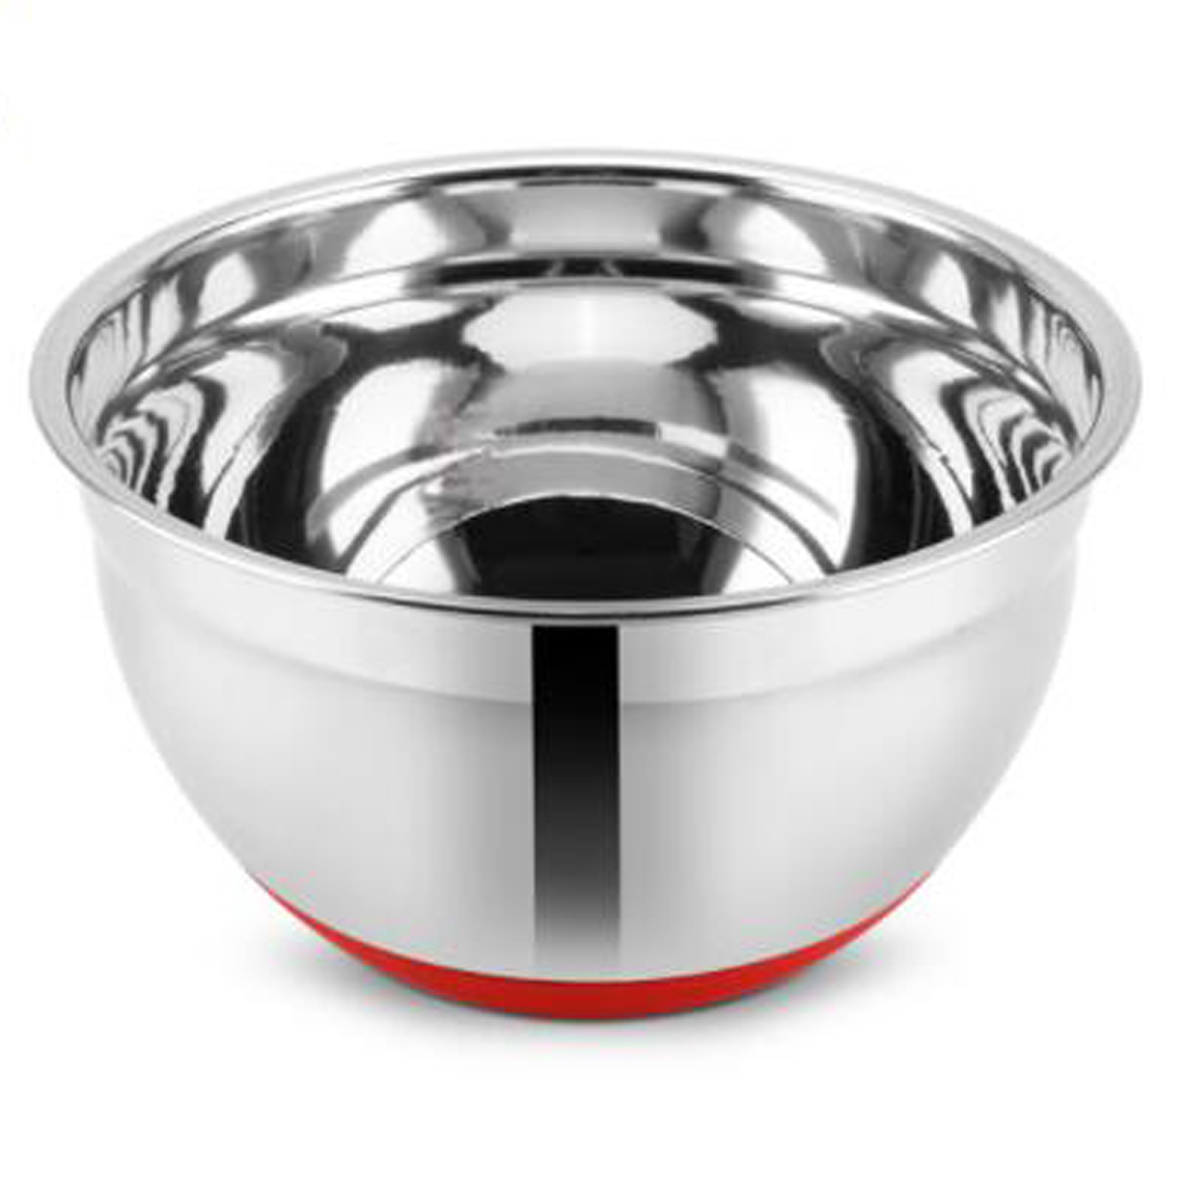 GL-ELY1279 Stainless Steel Salad Bowl with Non-slip Silicone Bottom